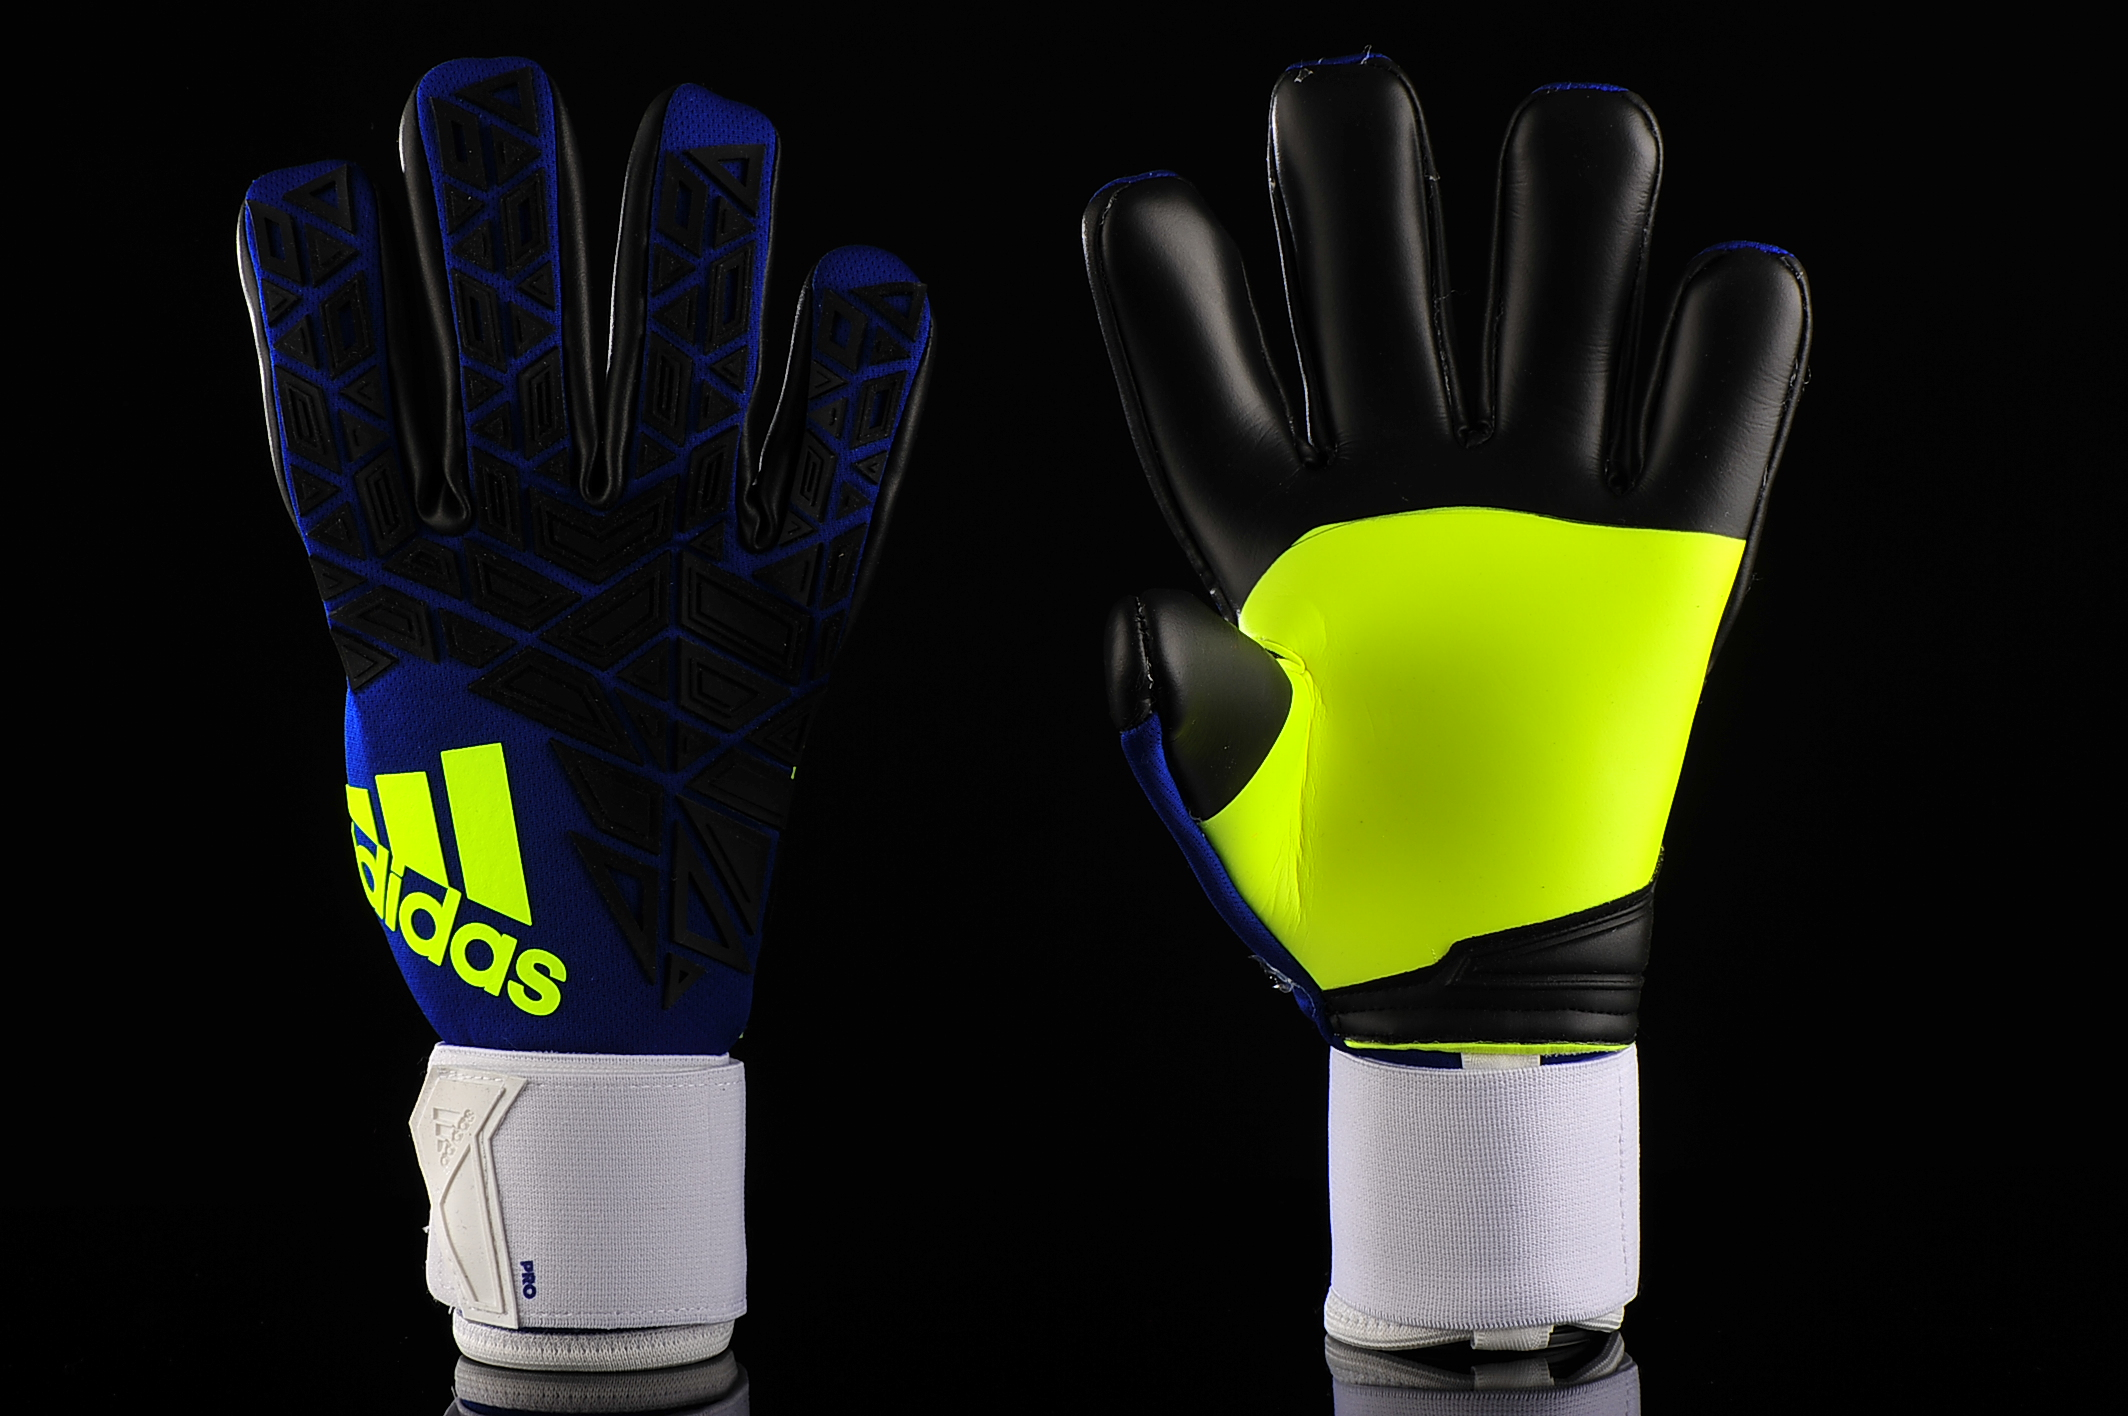 adidas ace trans pro gloves